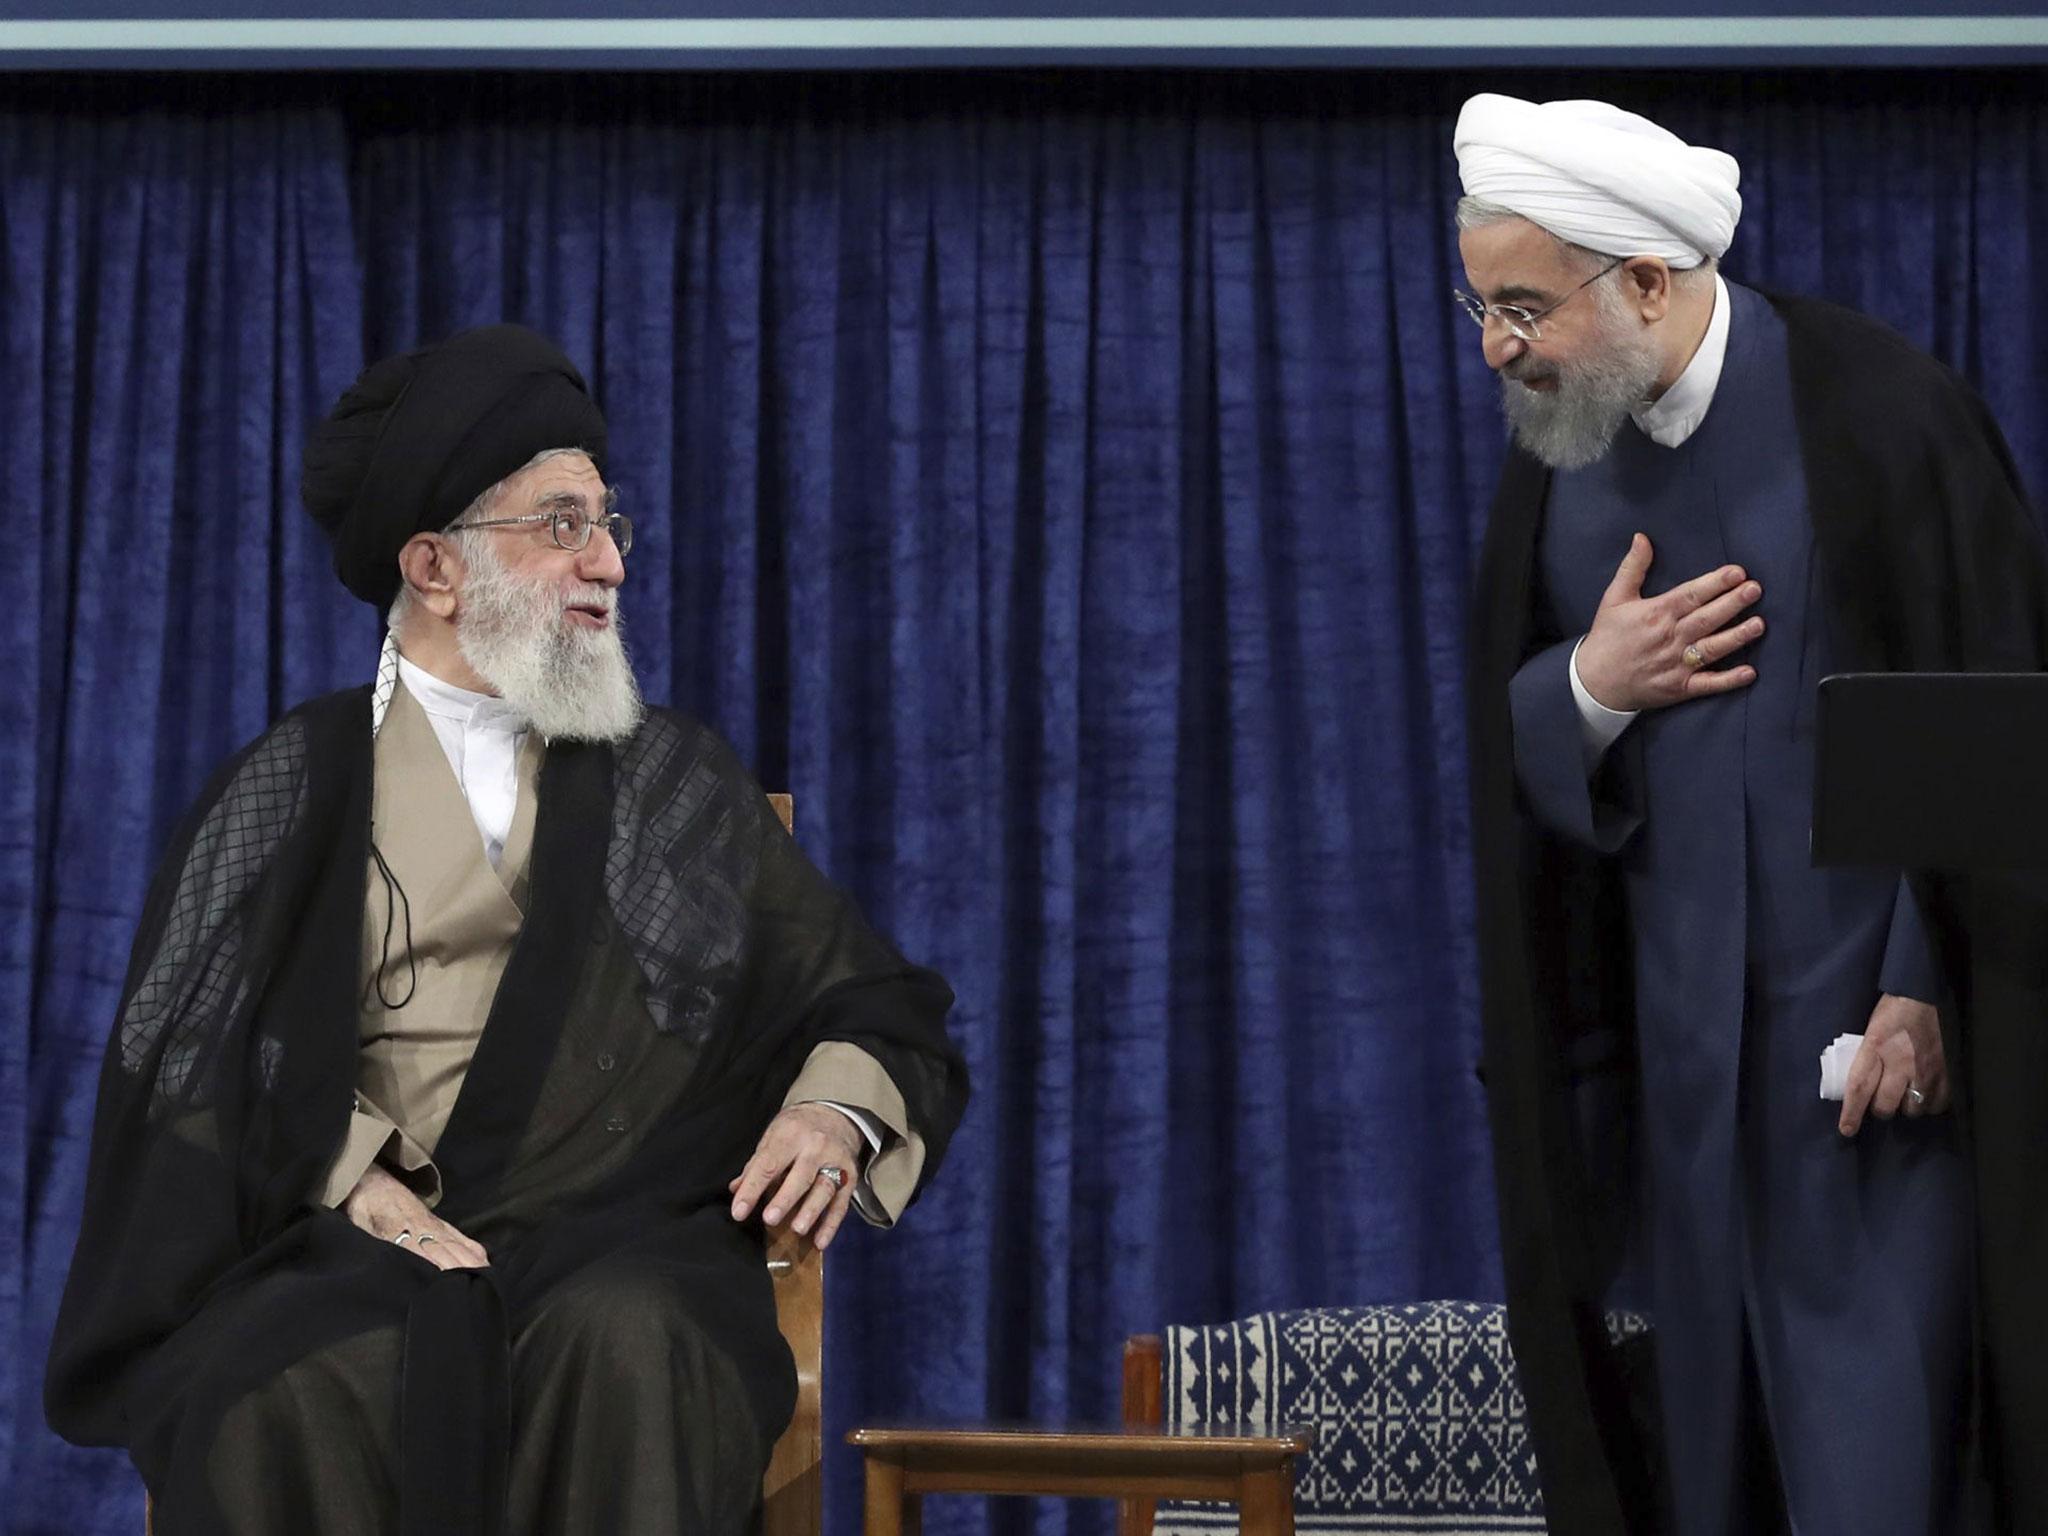 Iranian supreme leader Ayatollah Ali Khamenei (left) and President Hassan Rouhani greet at the official endorsement ceremony of President Rouhani in Tehran